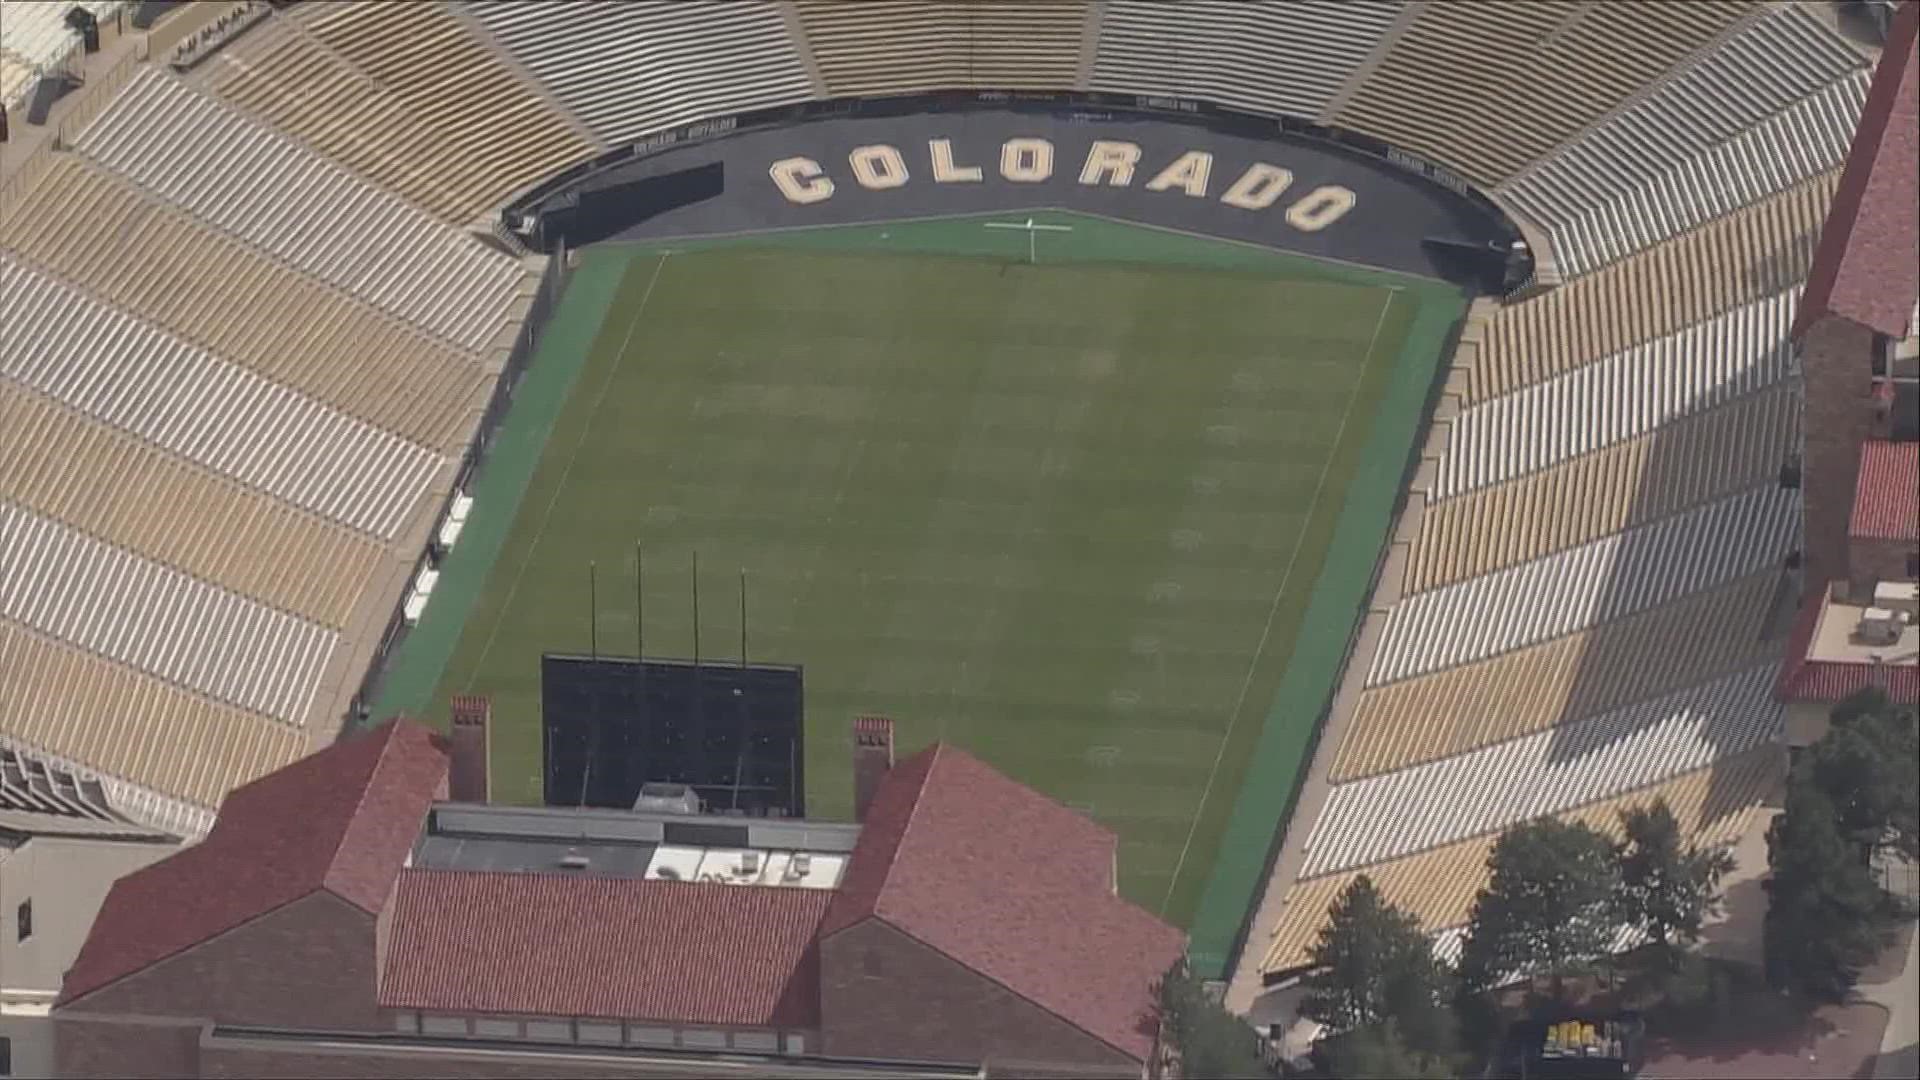 The University of Colorado's Folsom Field will host the Topgolf Live Stadium Tour this summer.